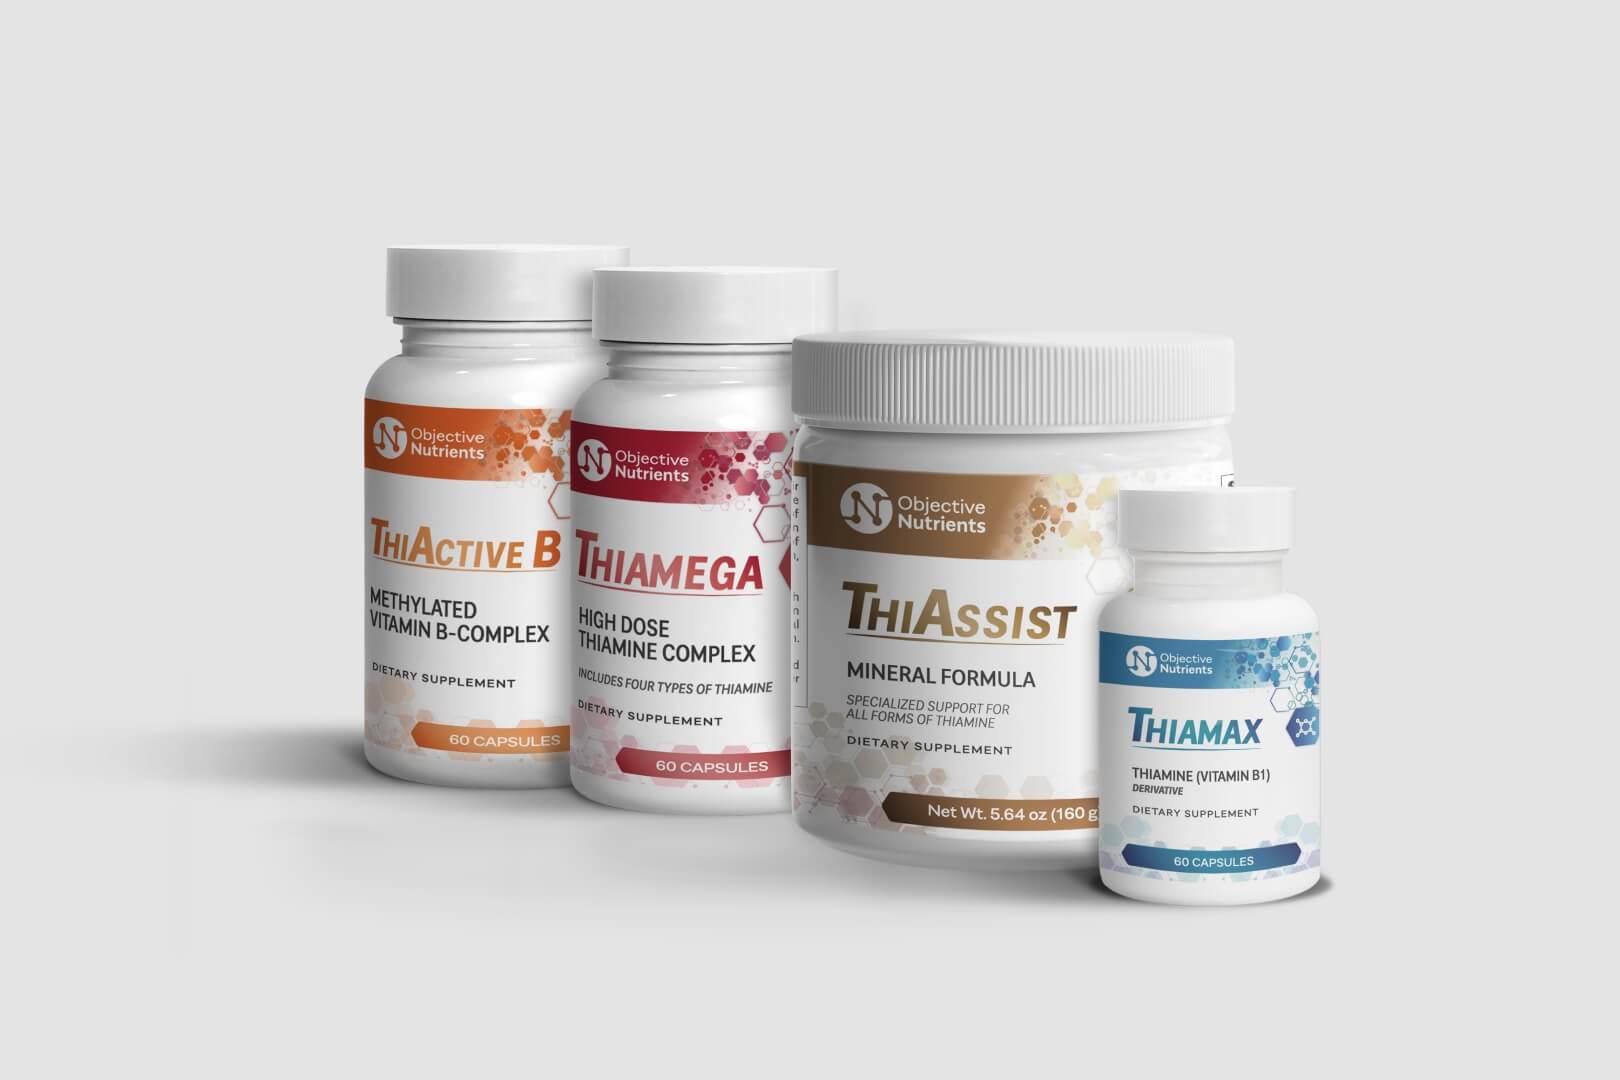 Image of bundled products which includes Thiamax, Thiassist, Thiamega and ThiActive B